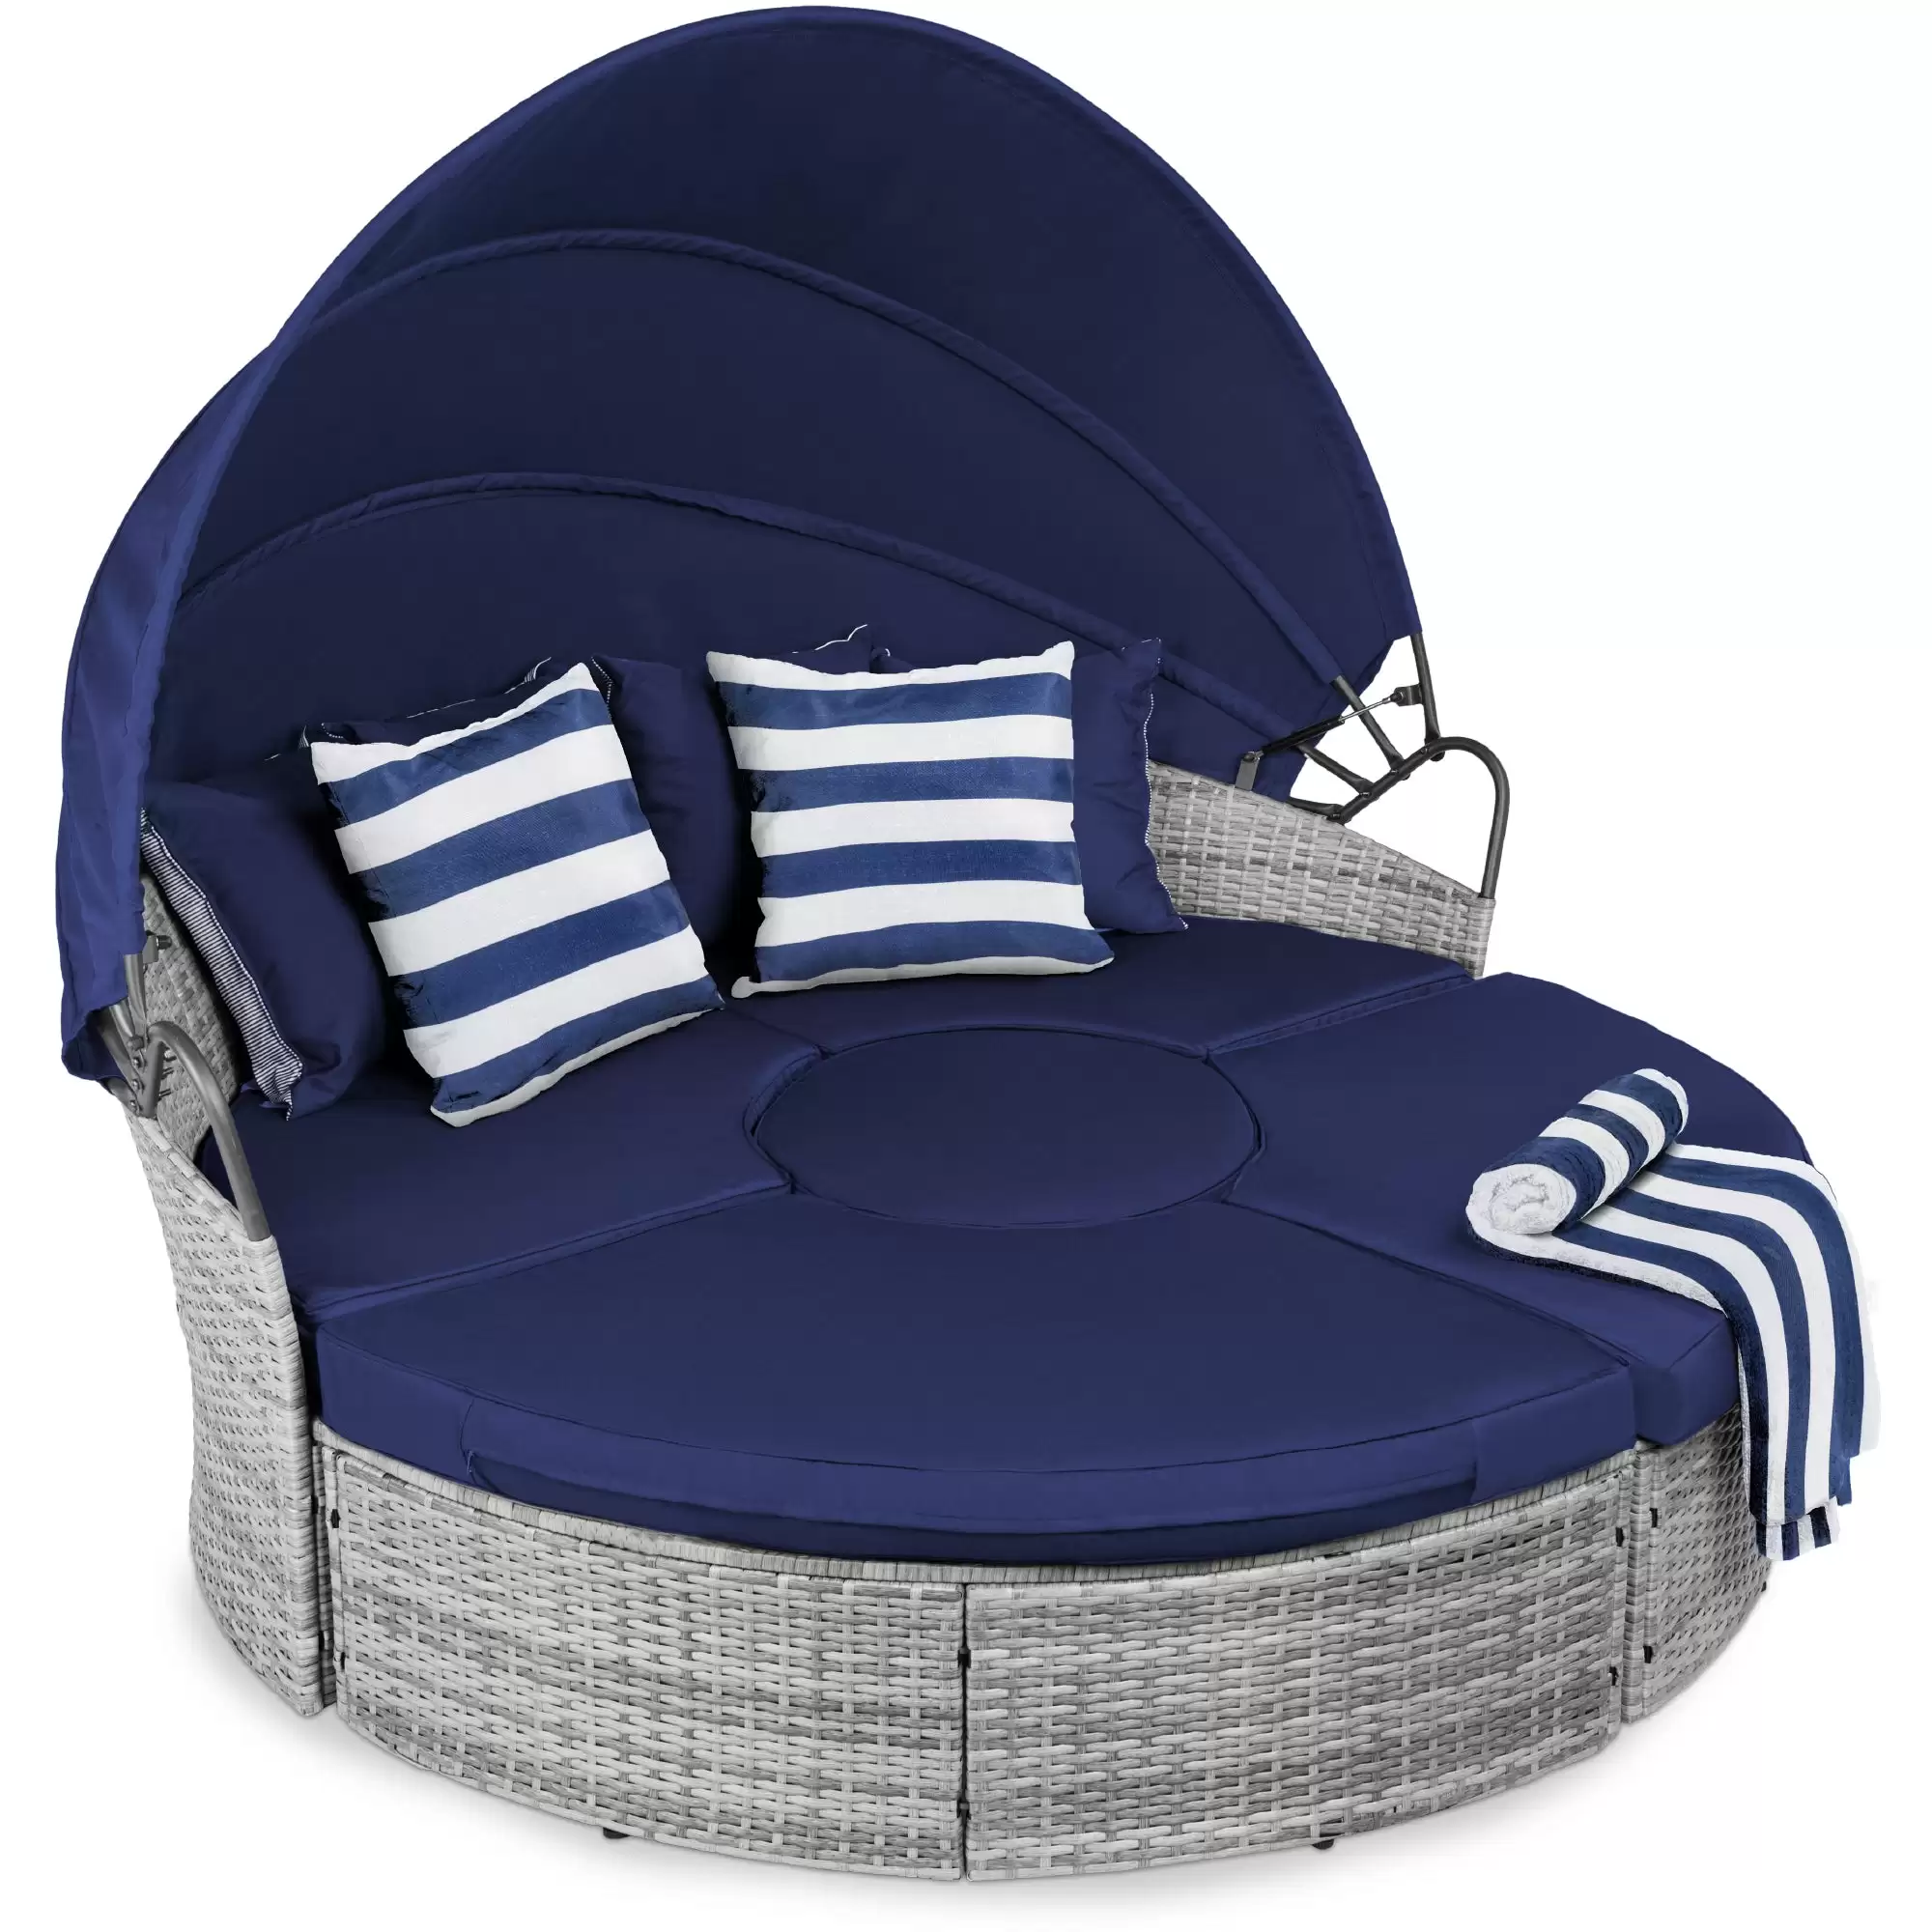 Pay $349.99 5-Piece 2-In-1 Wicker Daybed Sectional W/ Adjustable Seats, Canopy At Bestchoiceproducts